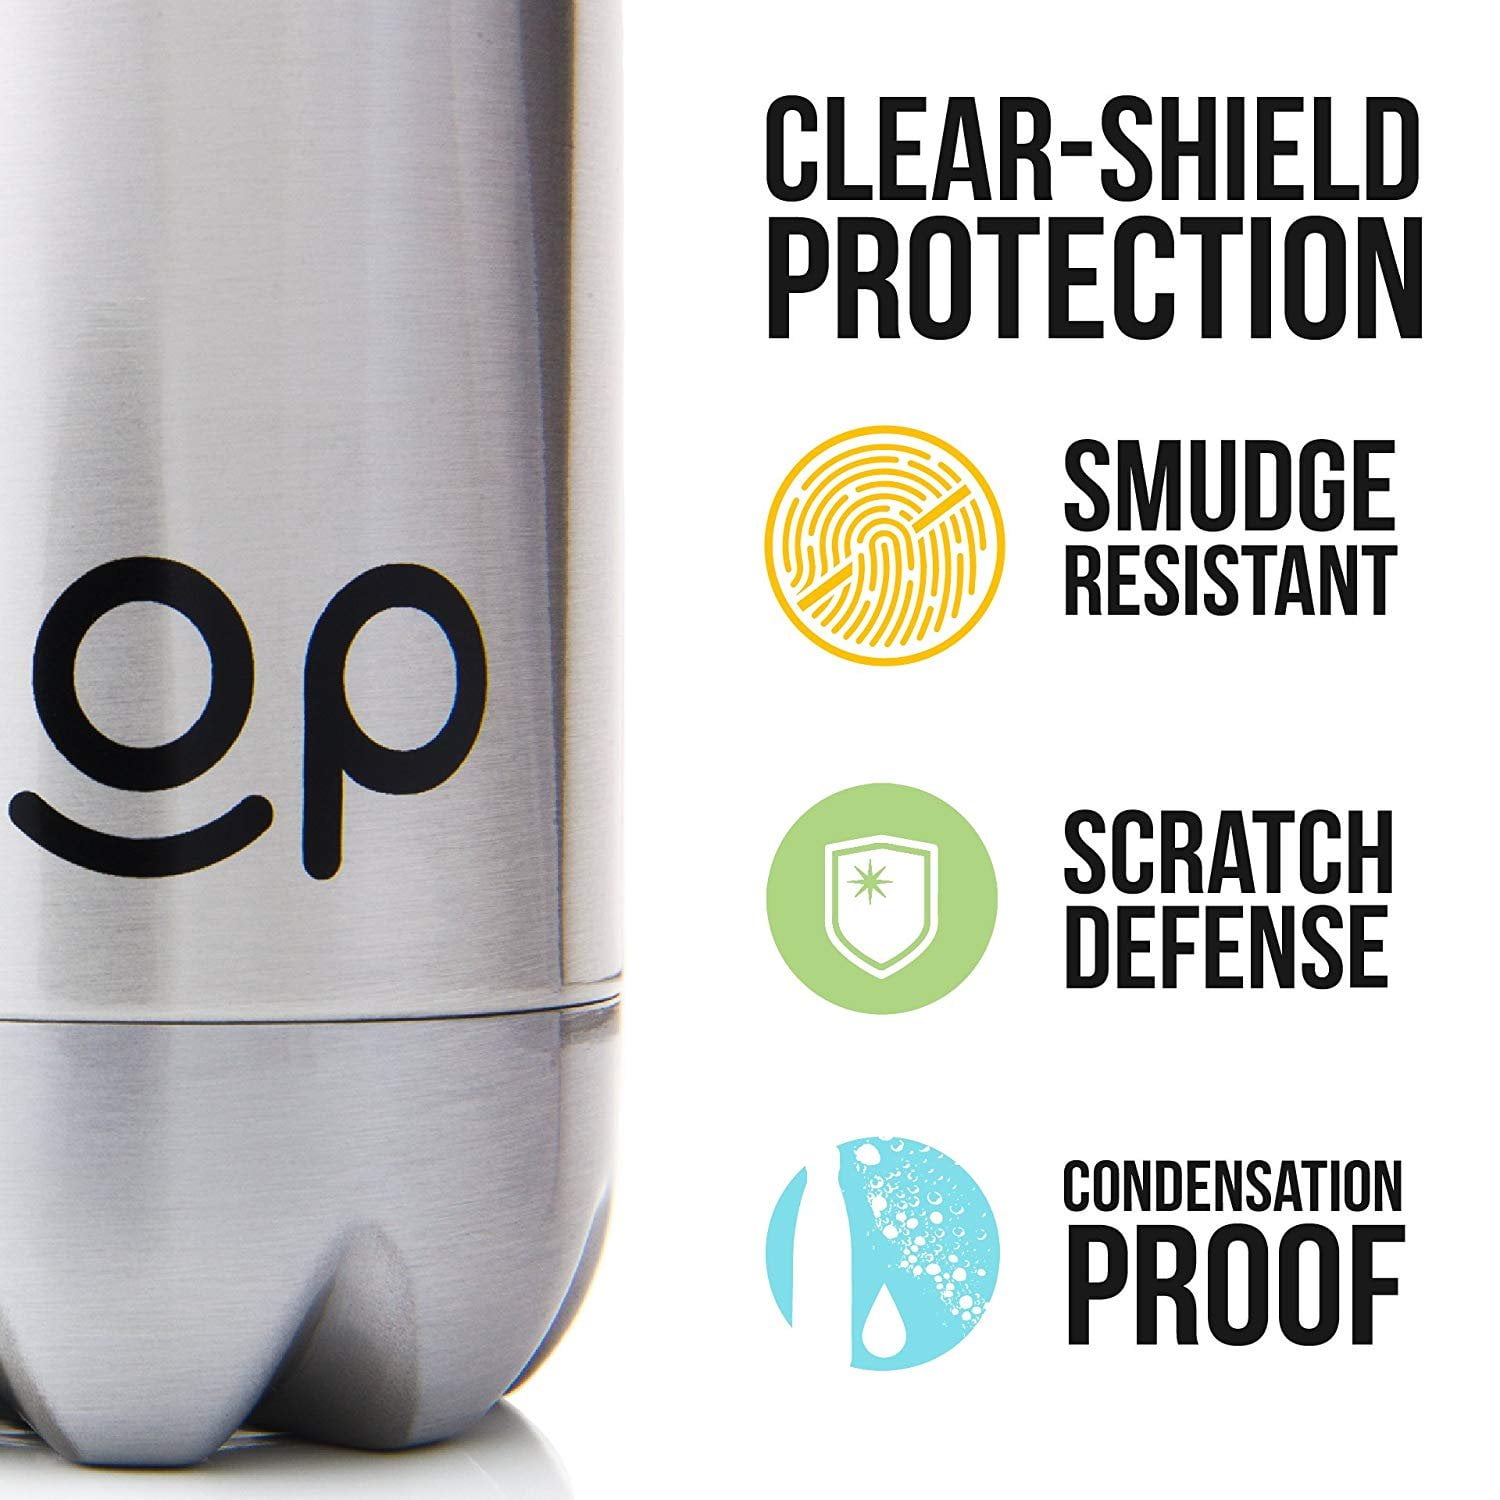 POP Design Stainless Steel Vacuum Insulated Water Bottle